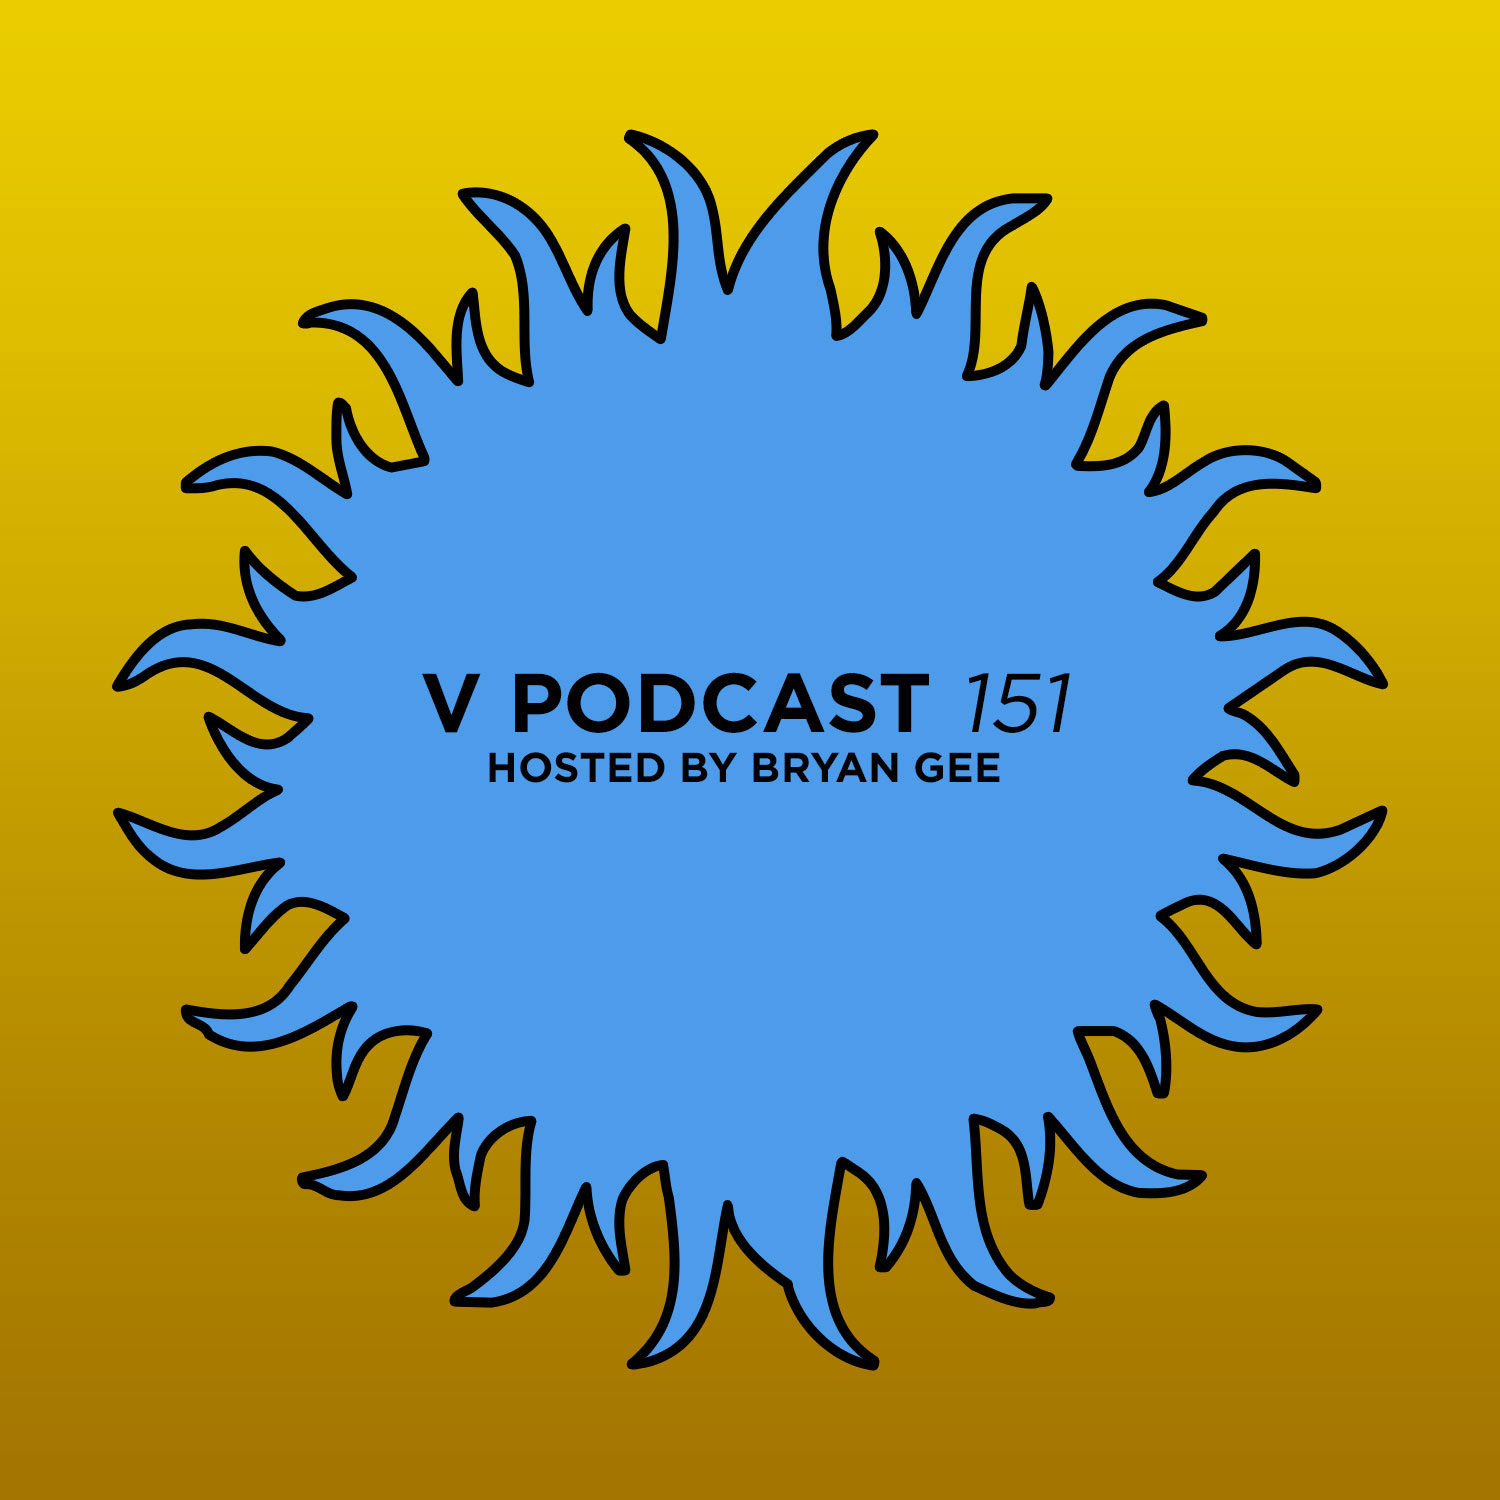 V Podcast 151 - Hosted by Bryan Gee Artwork